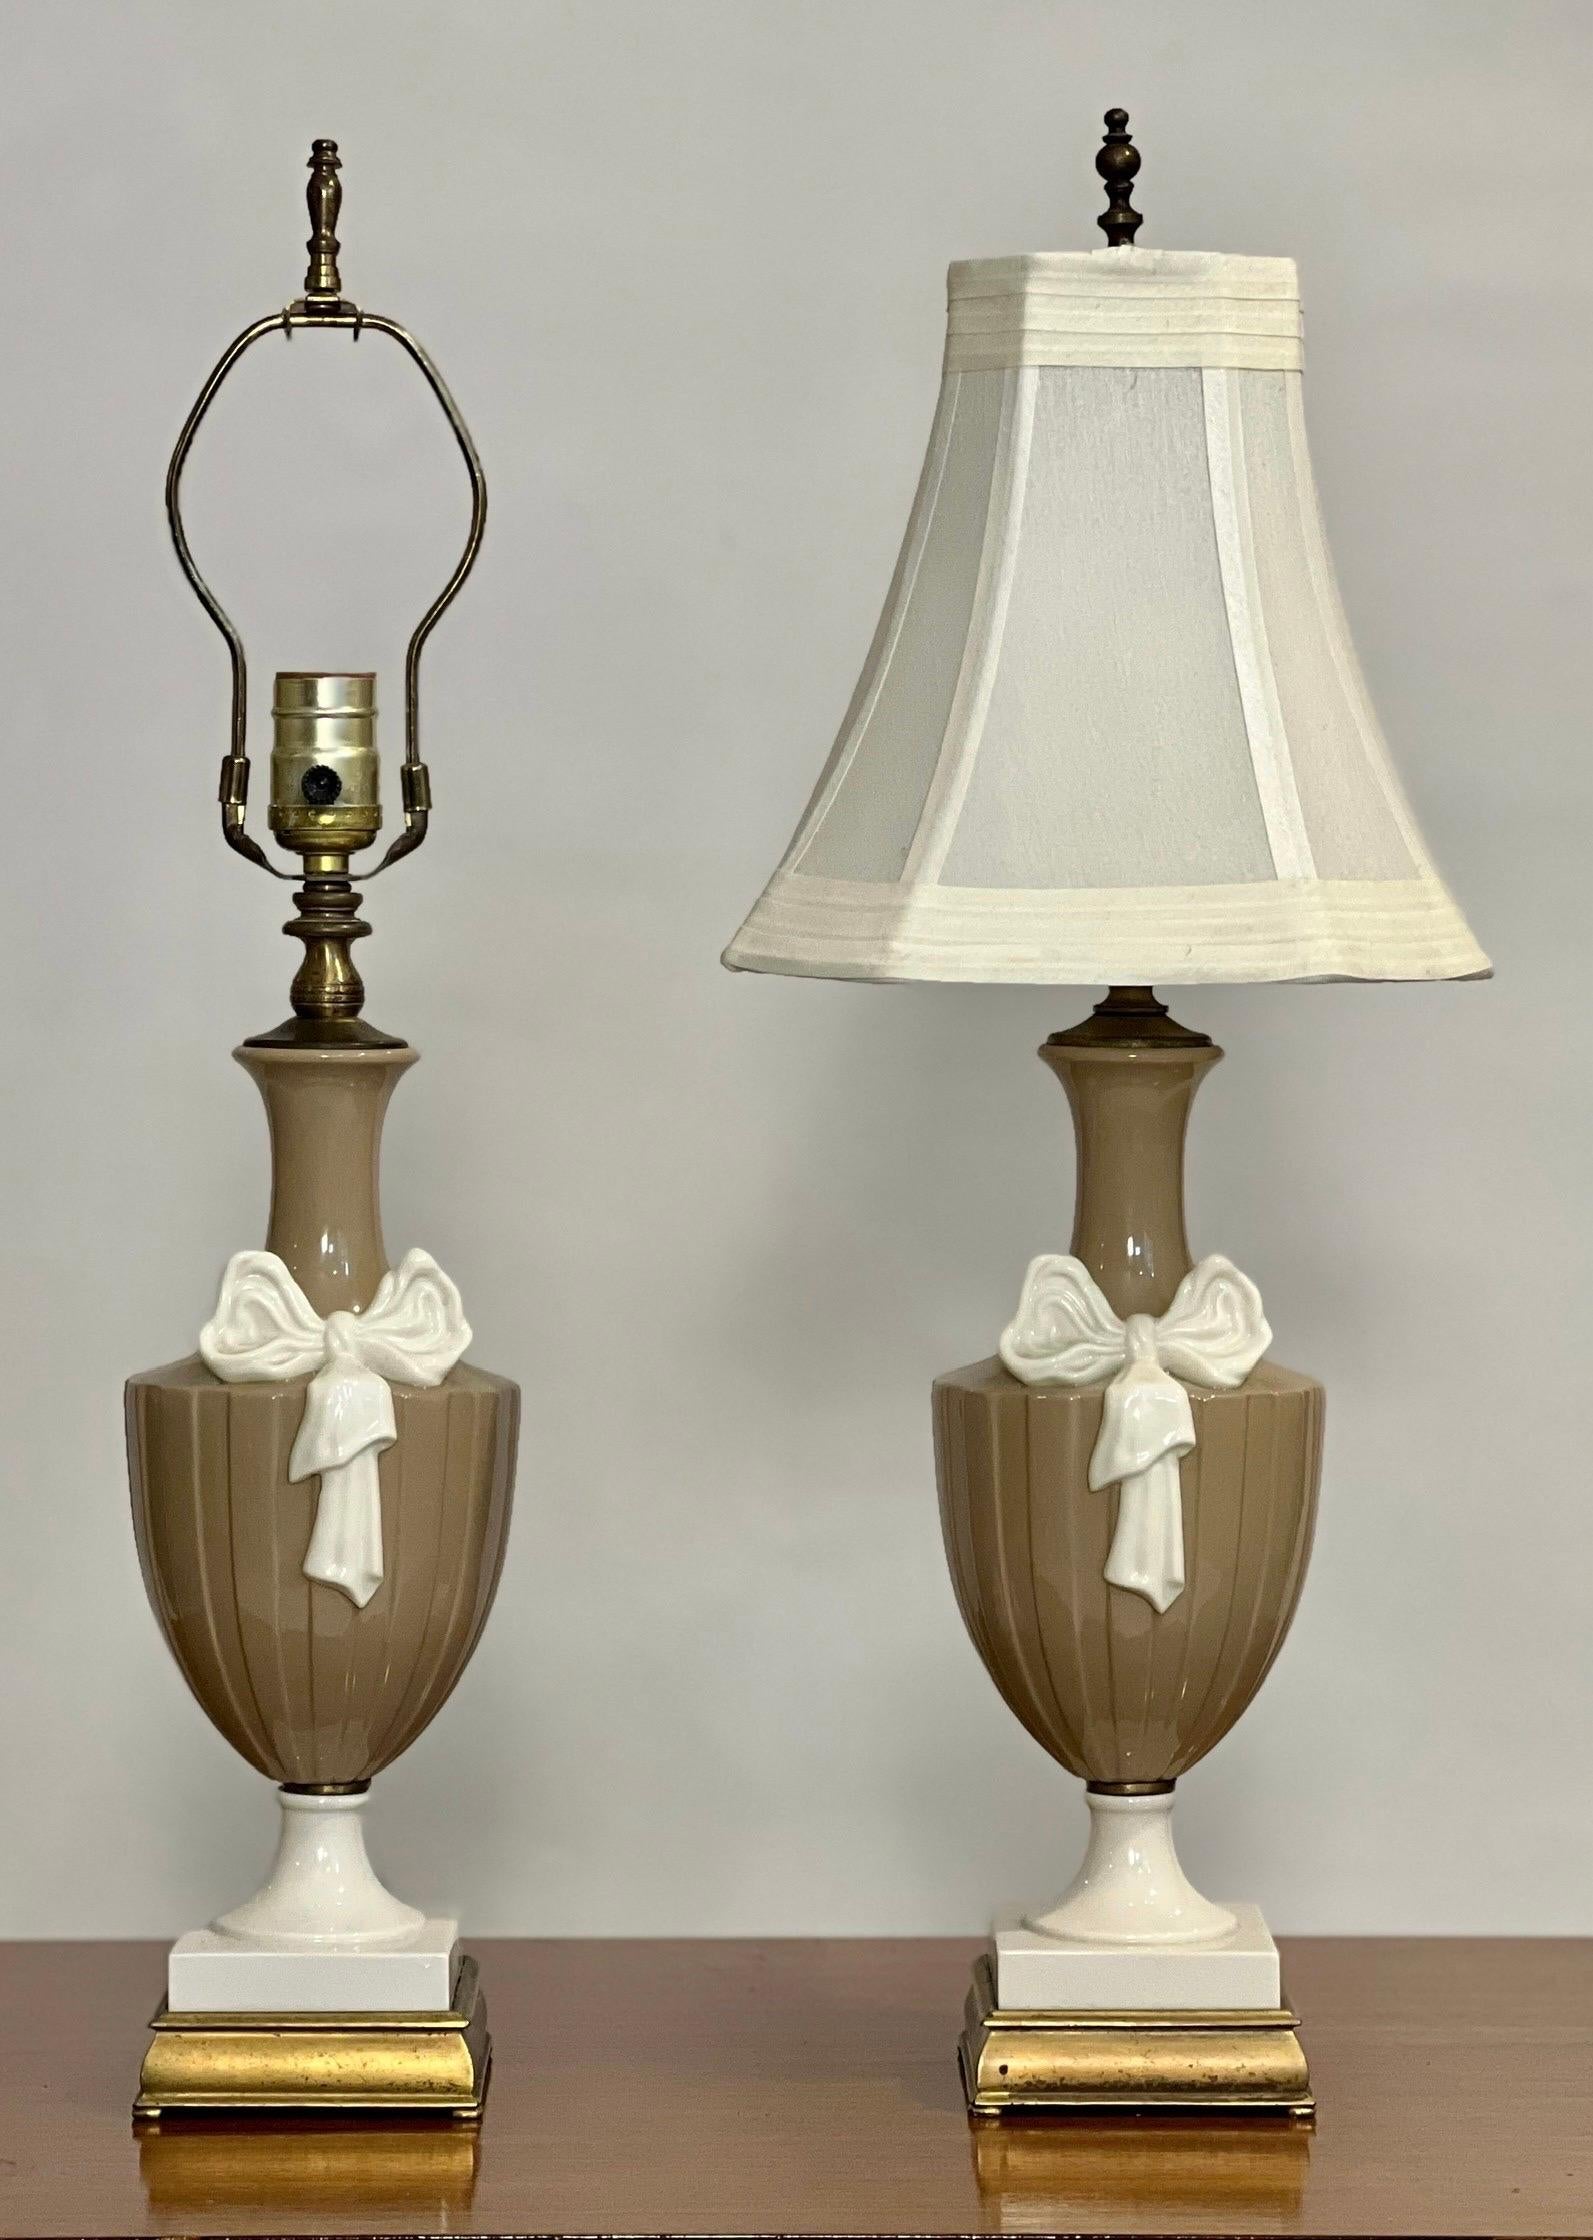 Pair of Lenox attributed Neoclassical style urn form porcelain lamps by Dav Art, NY.

Charming, petite lamps in a soothing modernist color scheme of taupe and creamy white set upon square brass bases with an intricately detailed bow draping down the